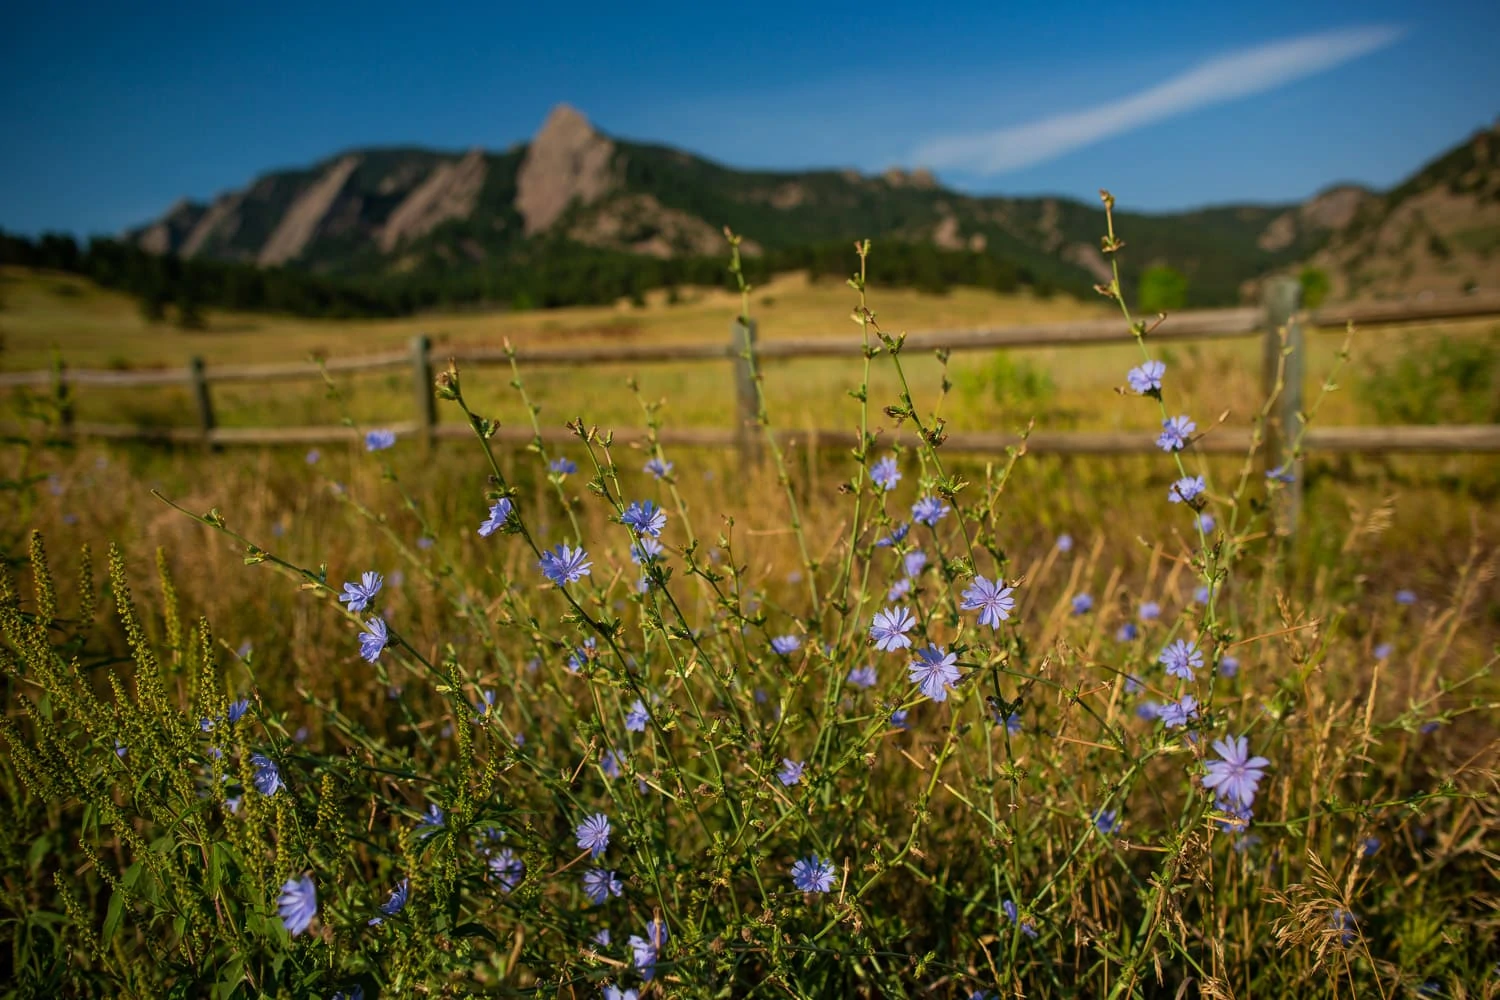 August at the flatirons mountains in Boulder brings wildflowers to the grassy field.